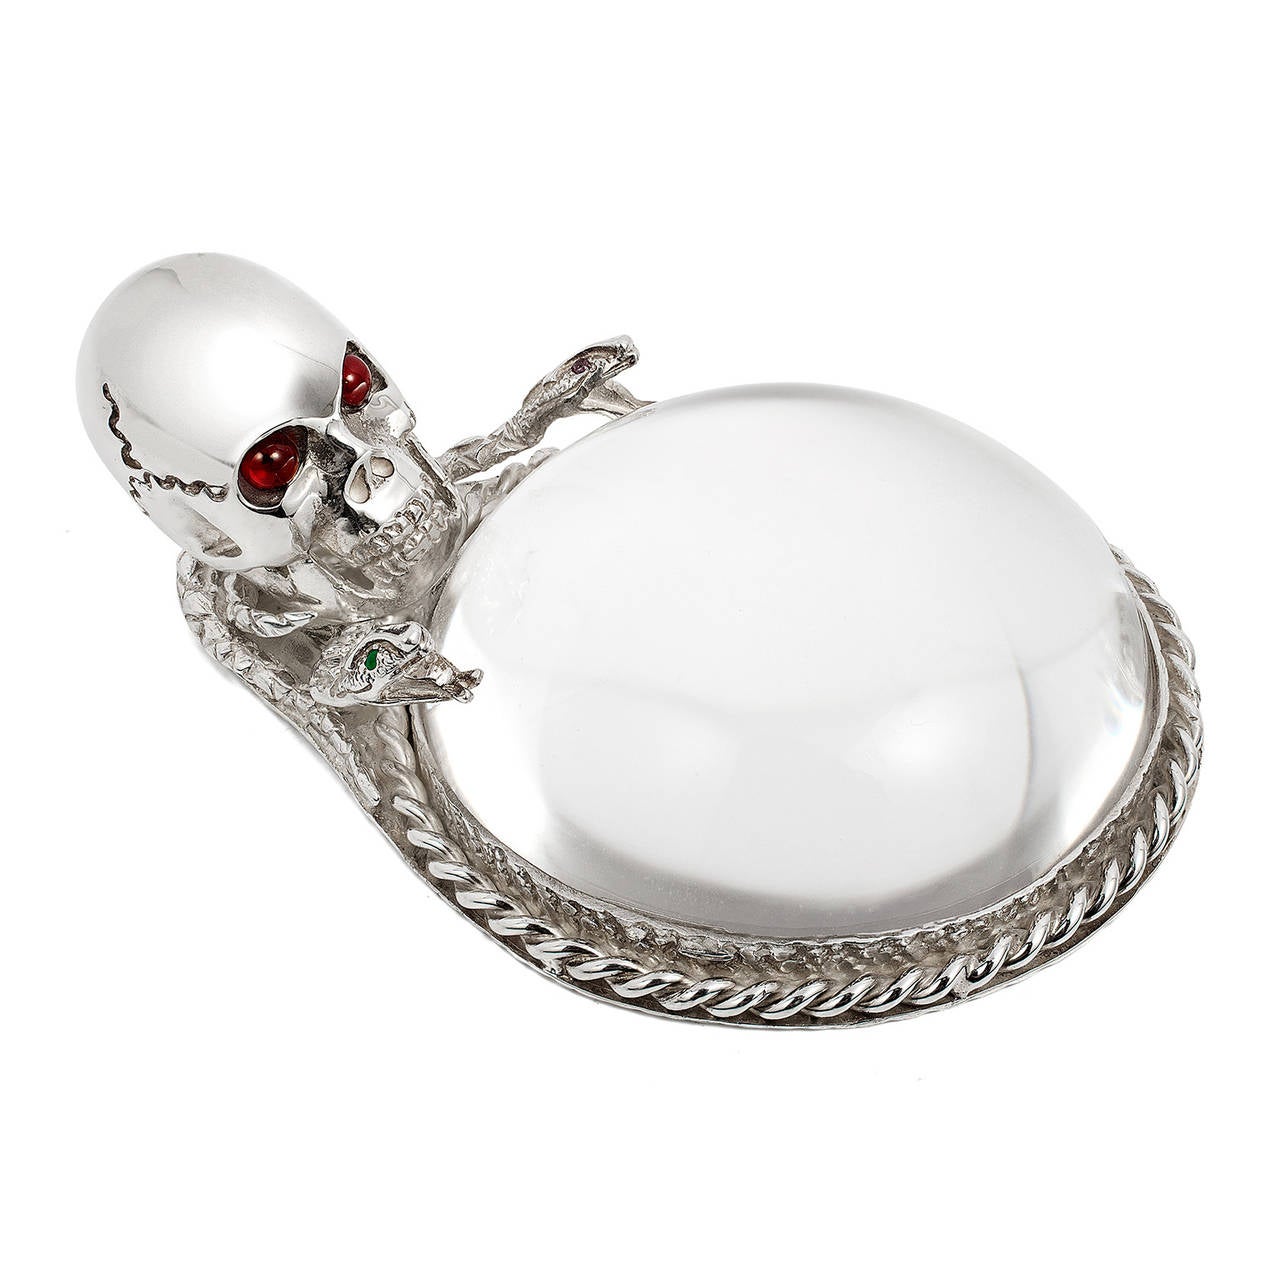 Striking sterling silver skull desk magnifier with cabochon ruby eyes by Renato Cipullo.  Snake with small emerald eyes and rope detail.